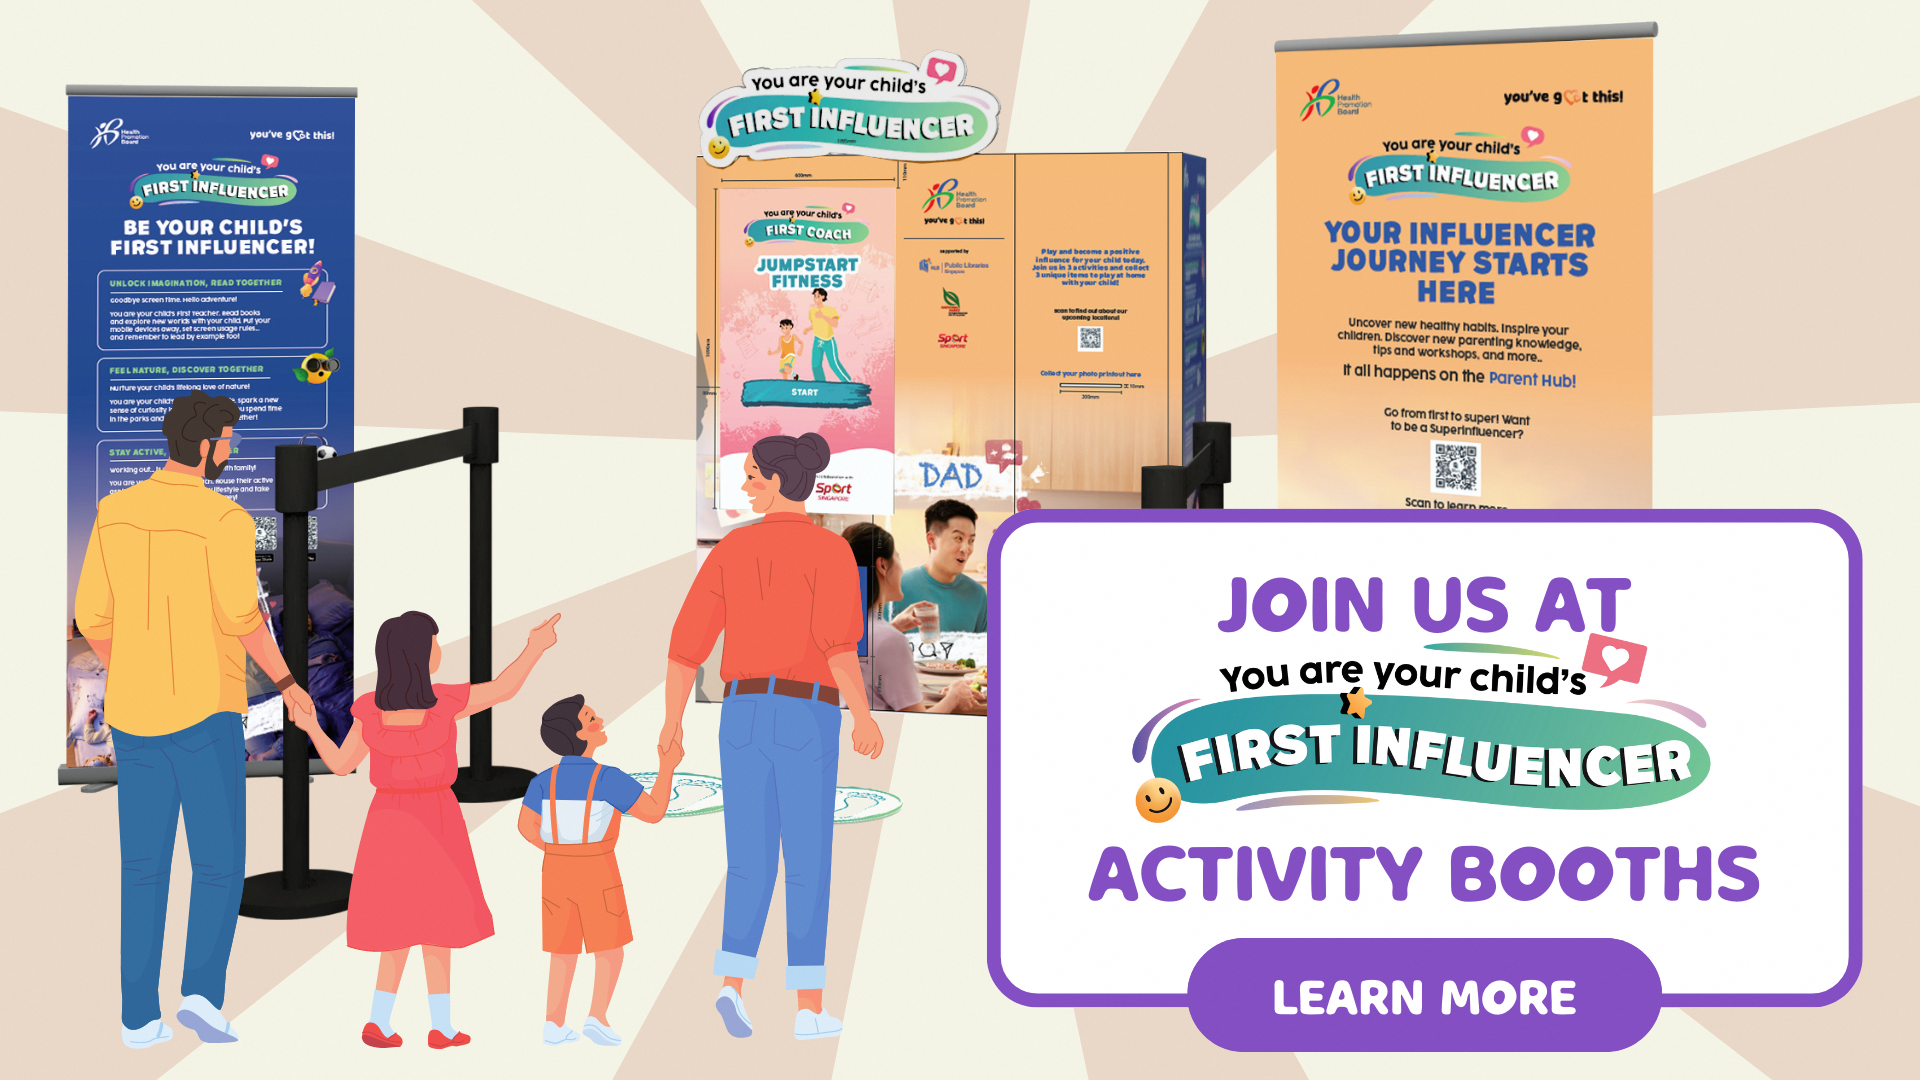 Join us at you are your childs first influencer activity booths